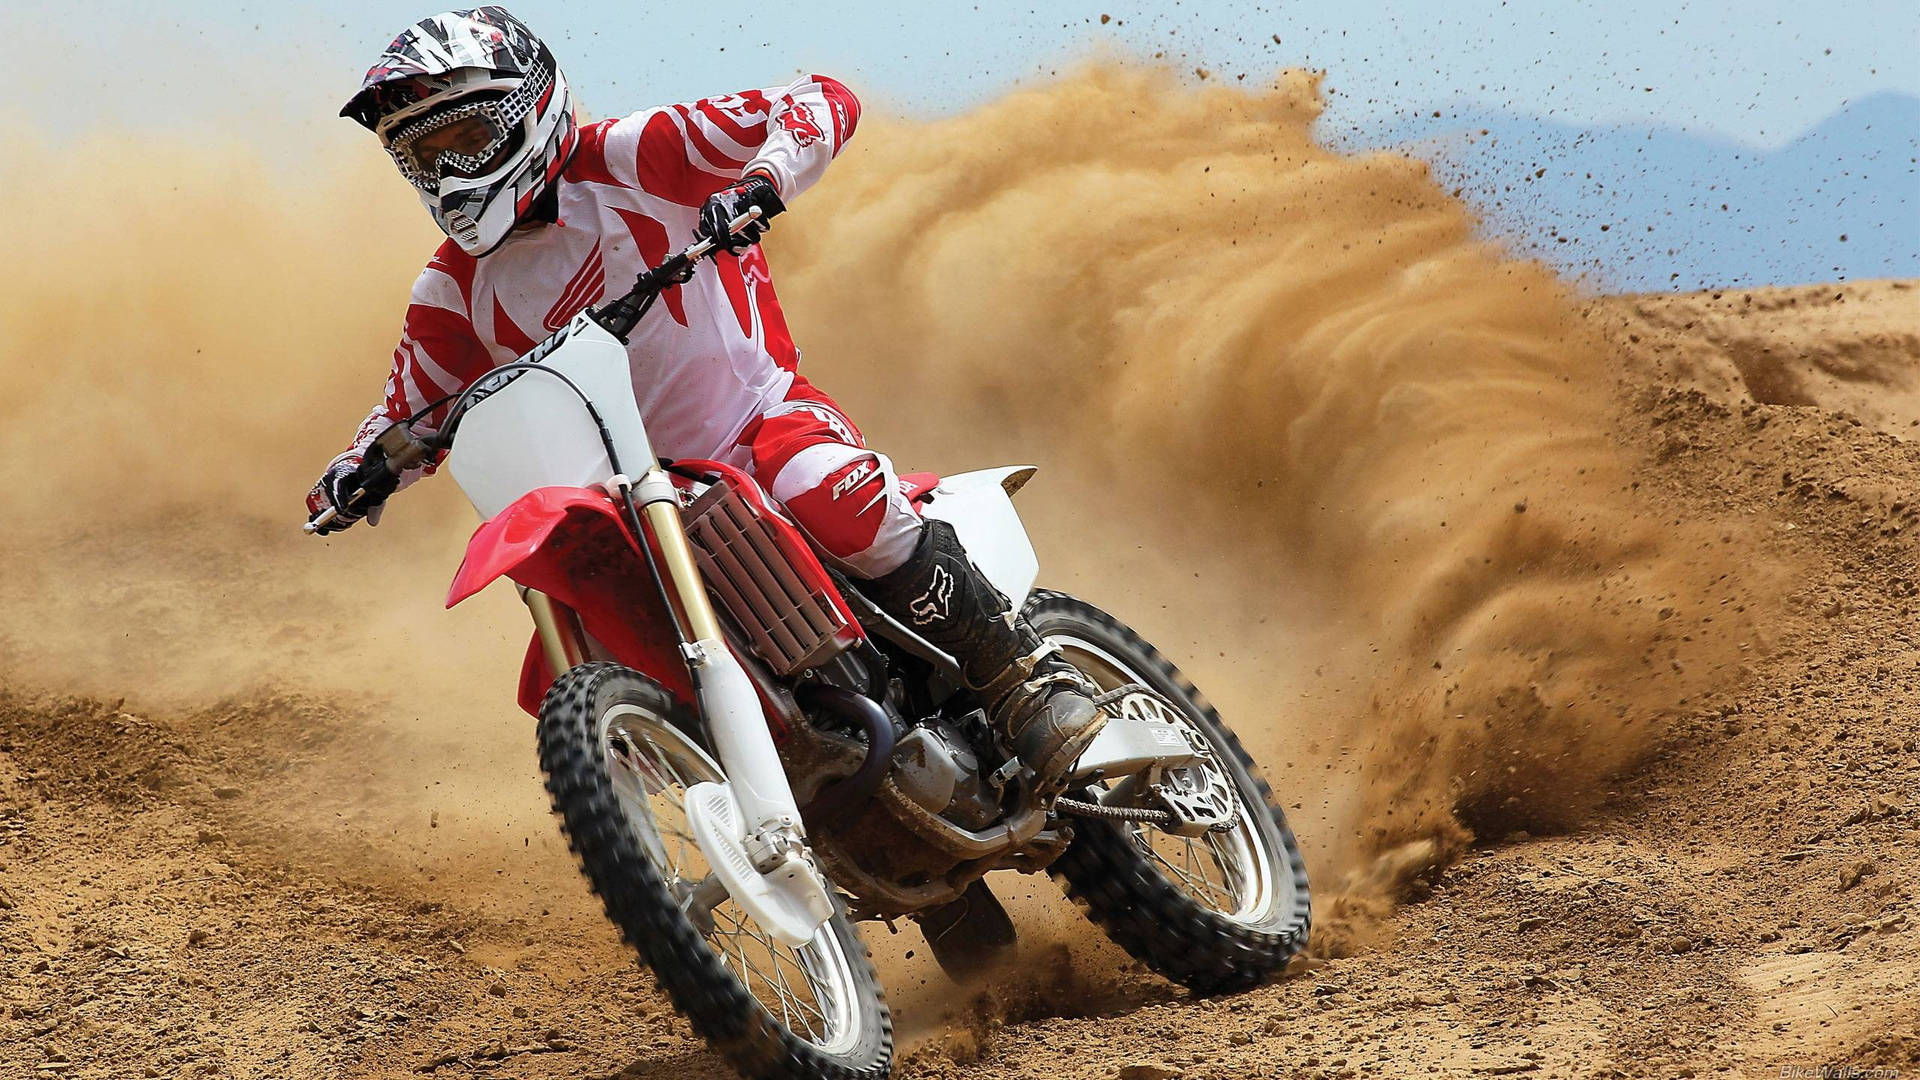 Get Ready to Ride in Style with Fox Dirt Bike Wallpaper